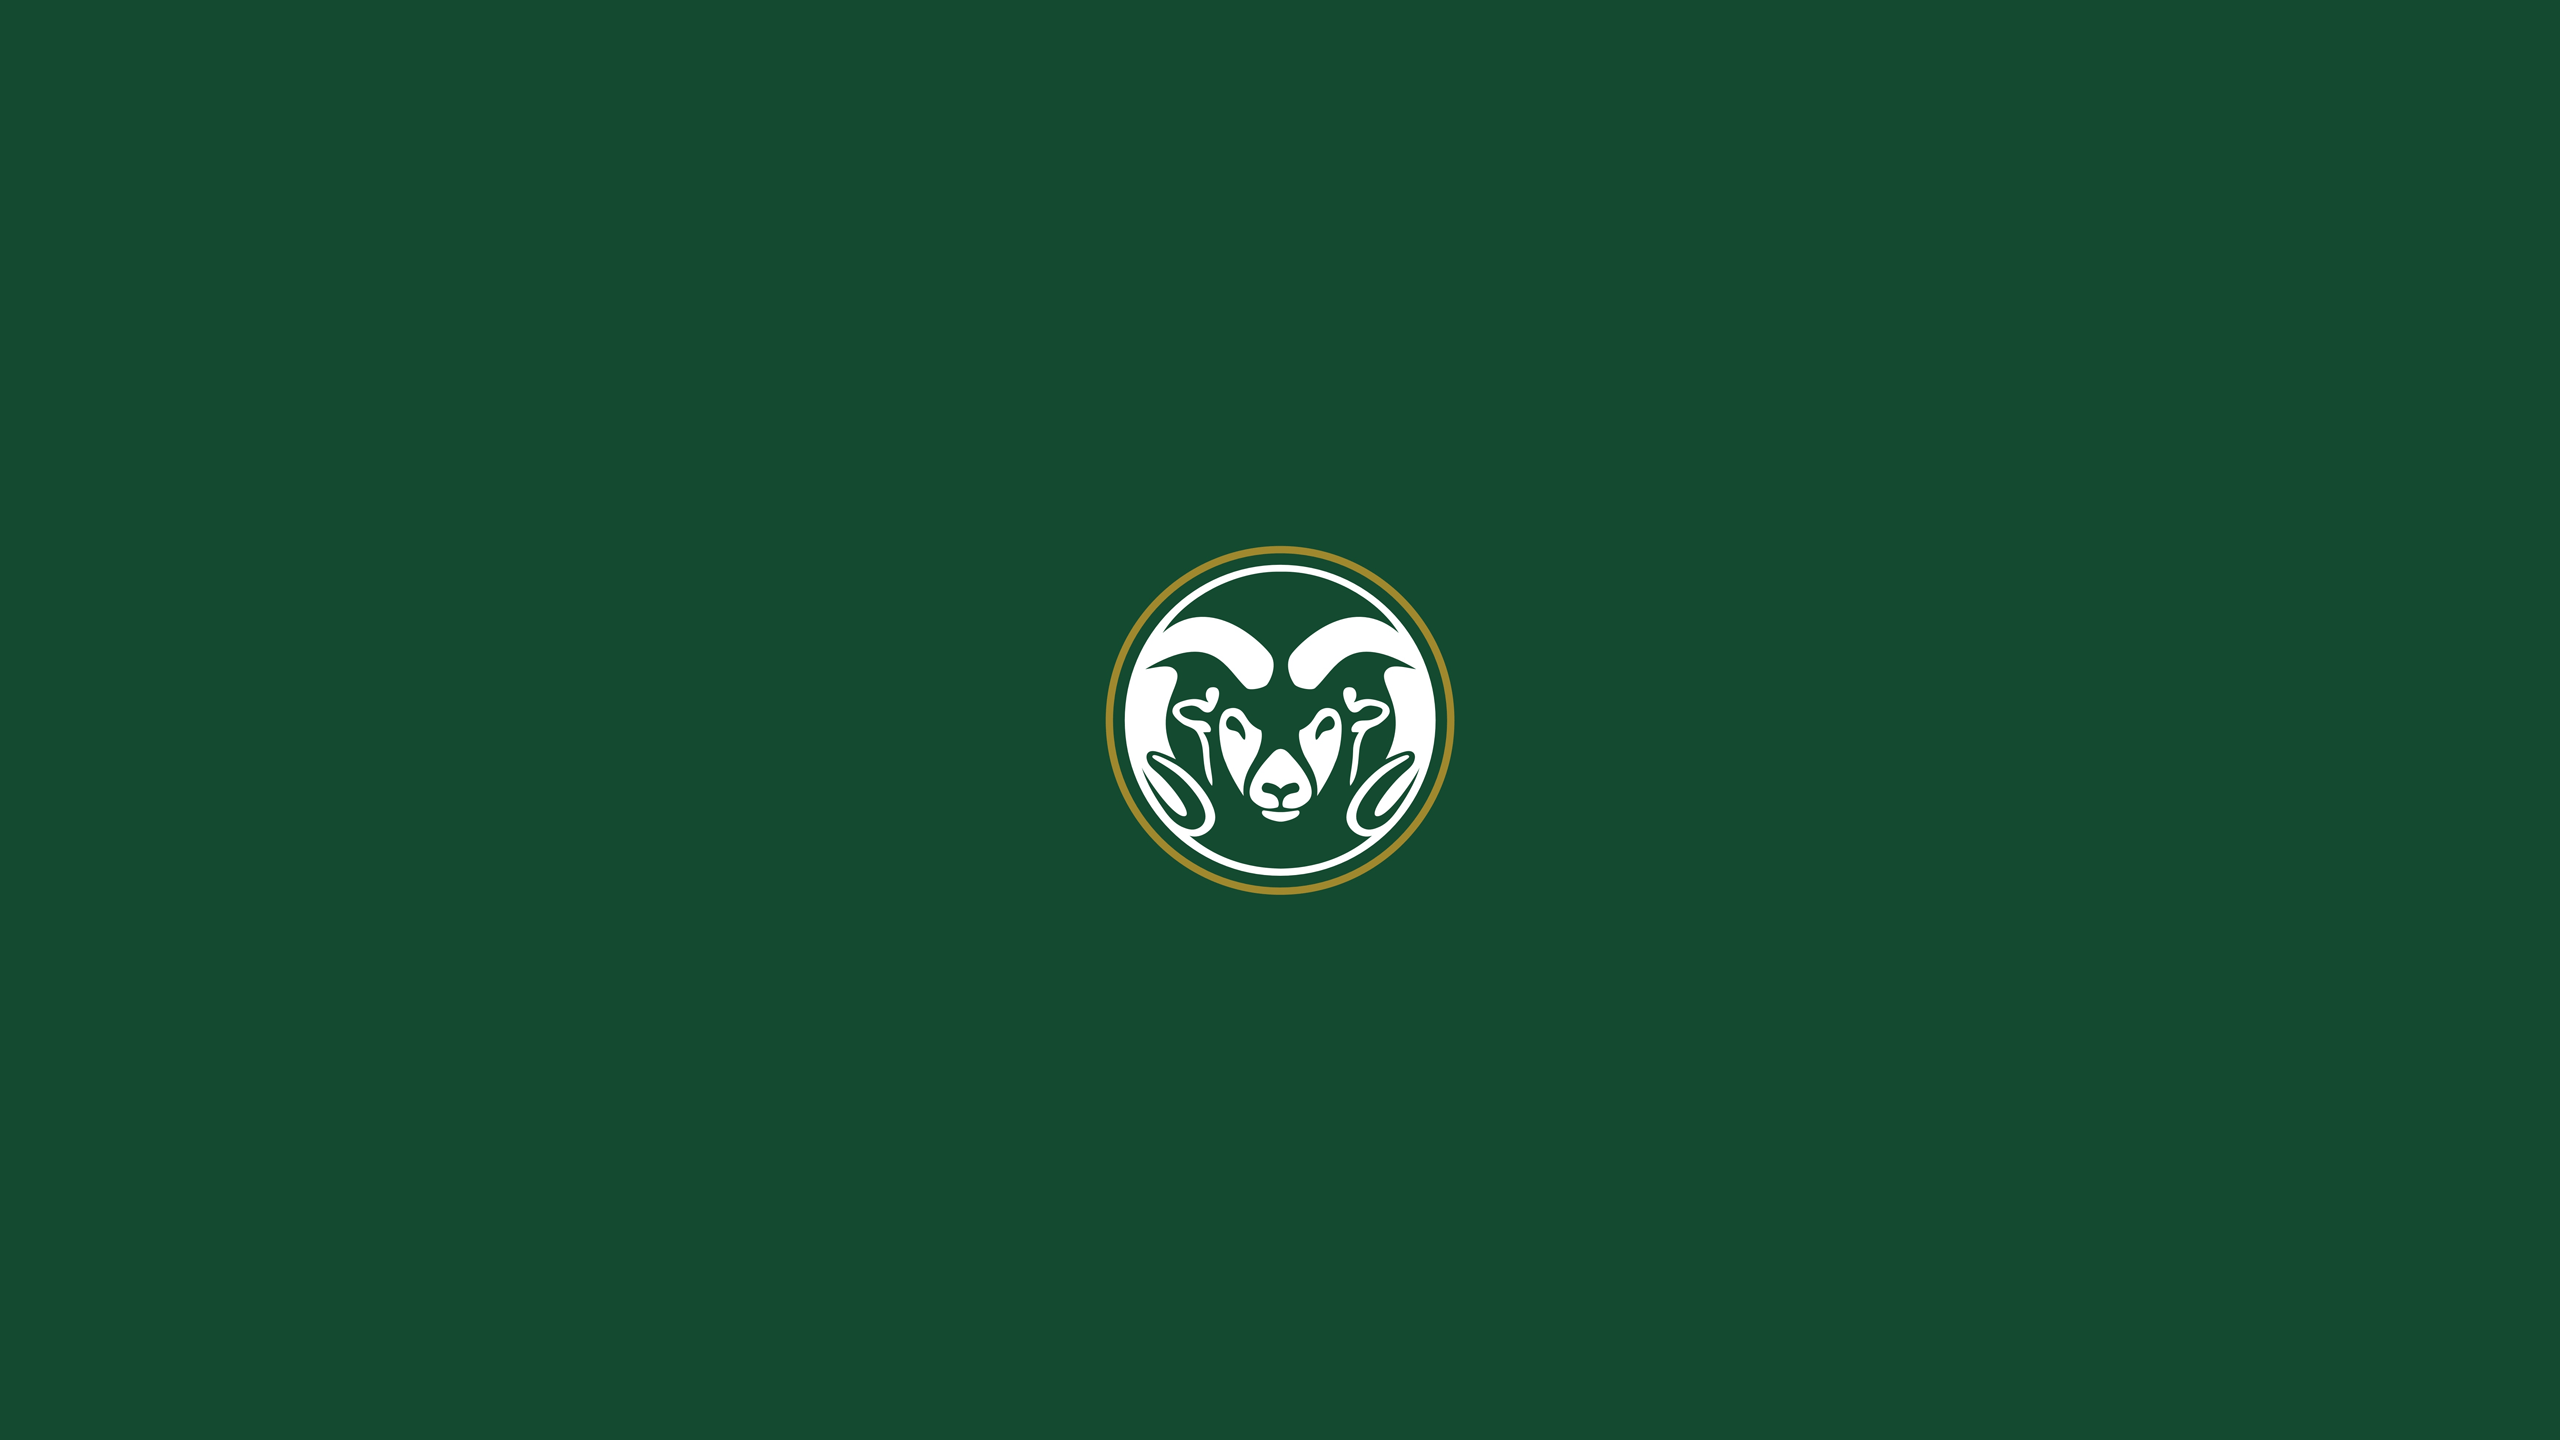 Colorado State Rams - NCAAF - Square Bettor